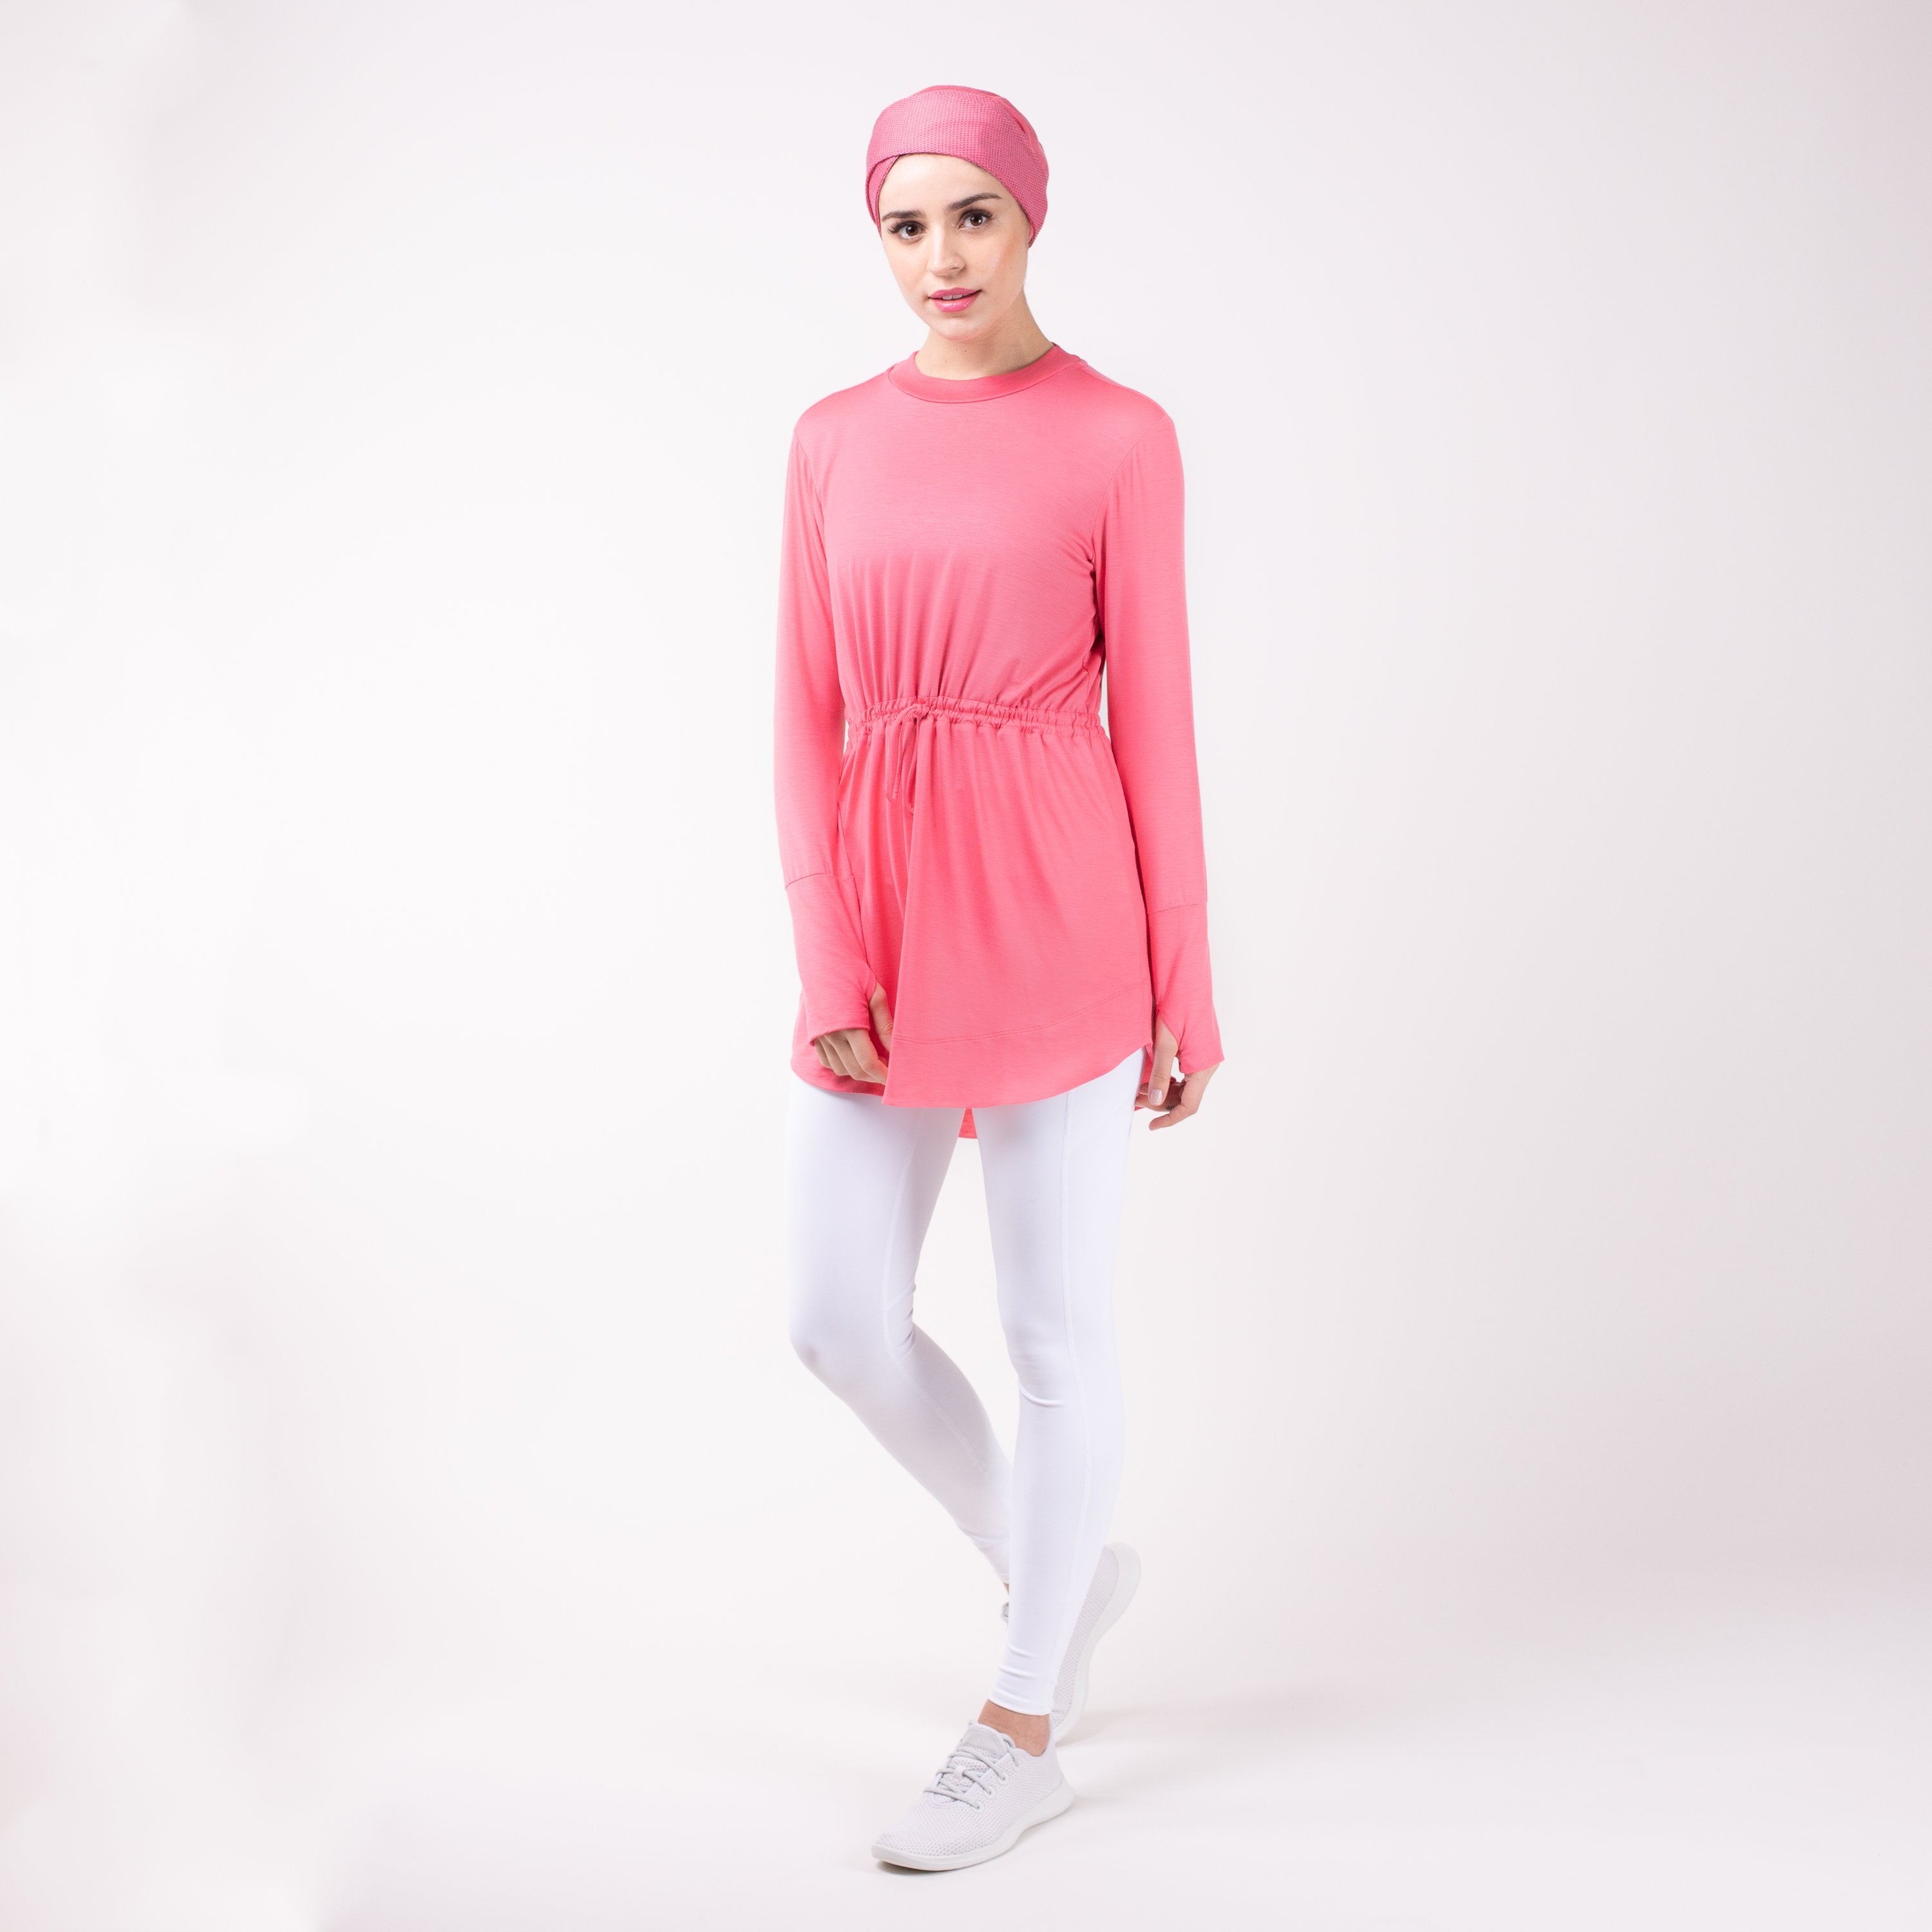 Woman standing with one leg bent wearing the modest, berry pink HAWA drawstring tee shirt and white leggings in front of a white back drop.